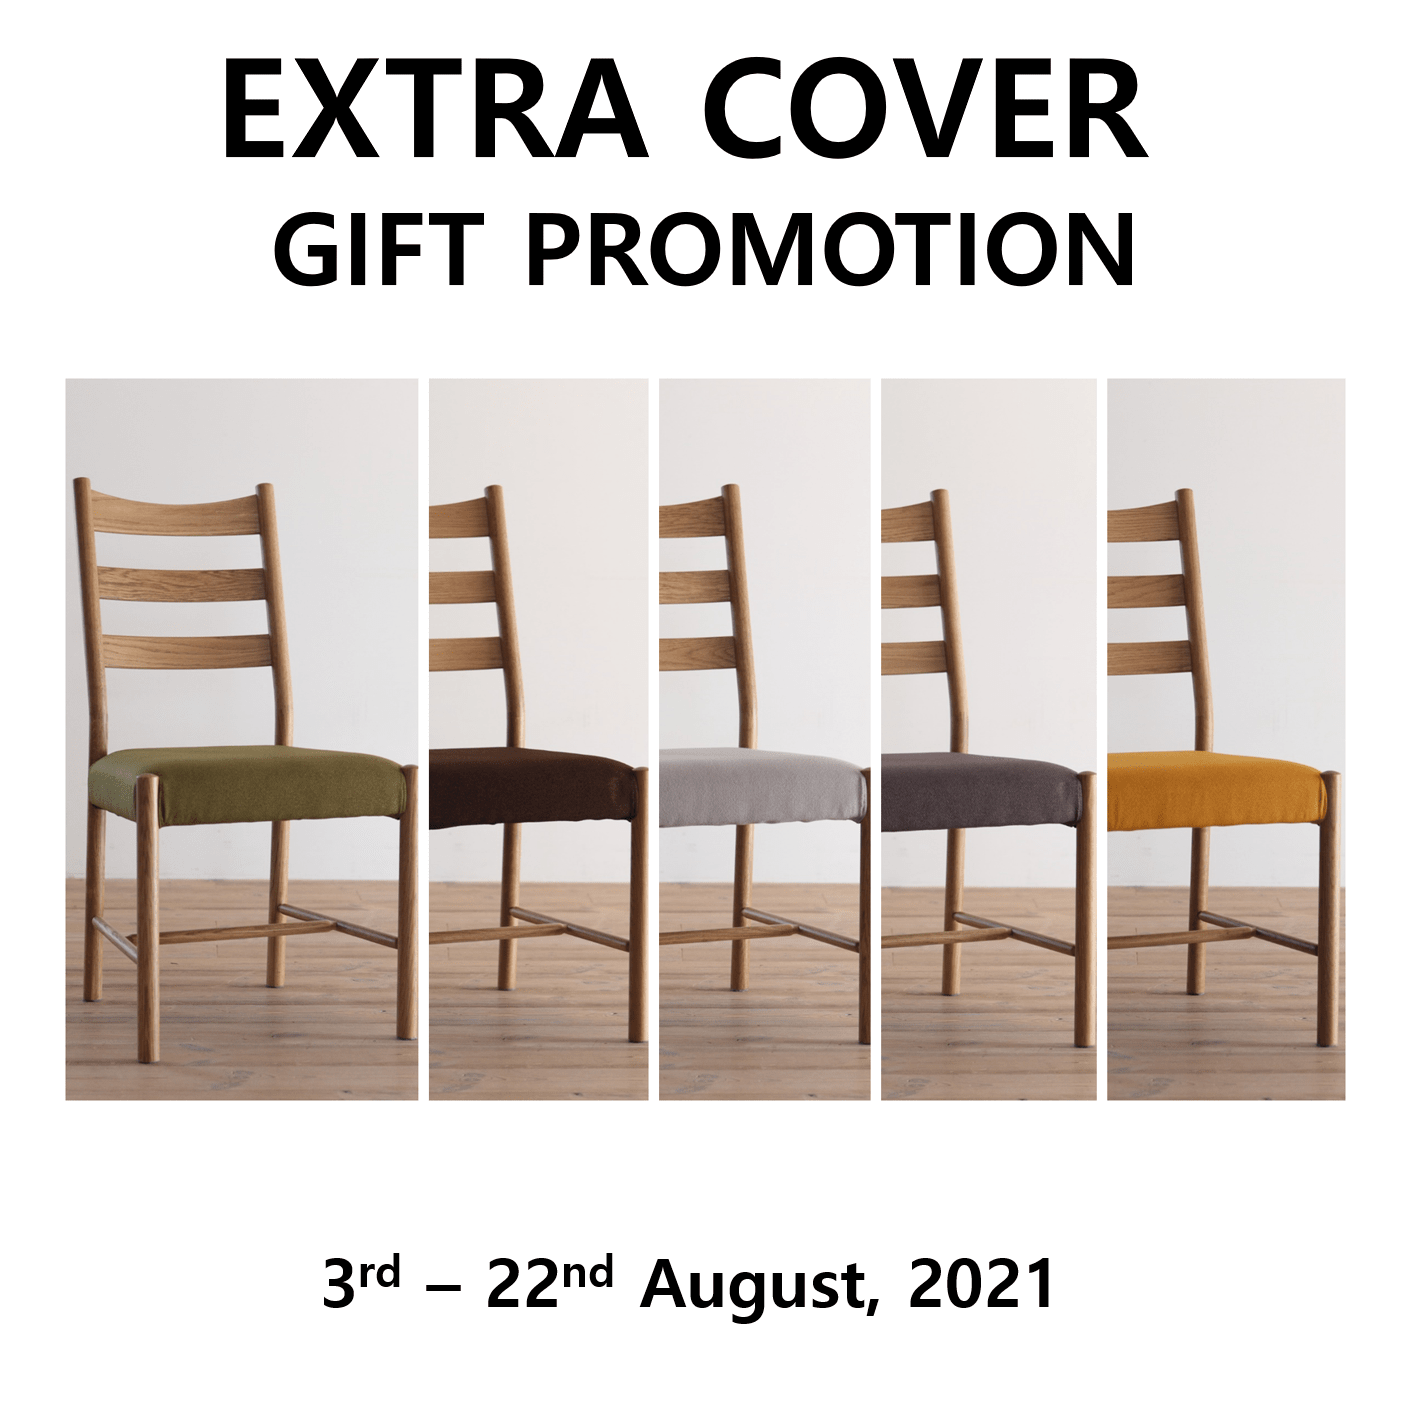 EXTRA COVER GIFT PROMOTION